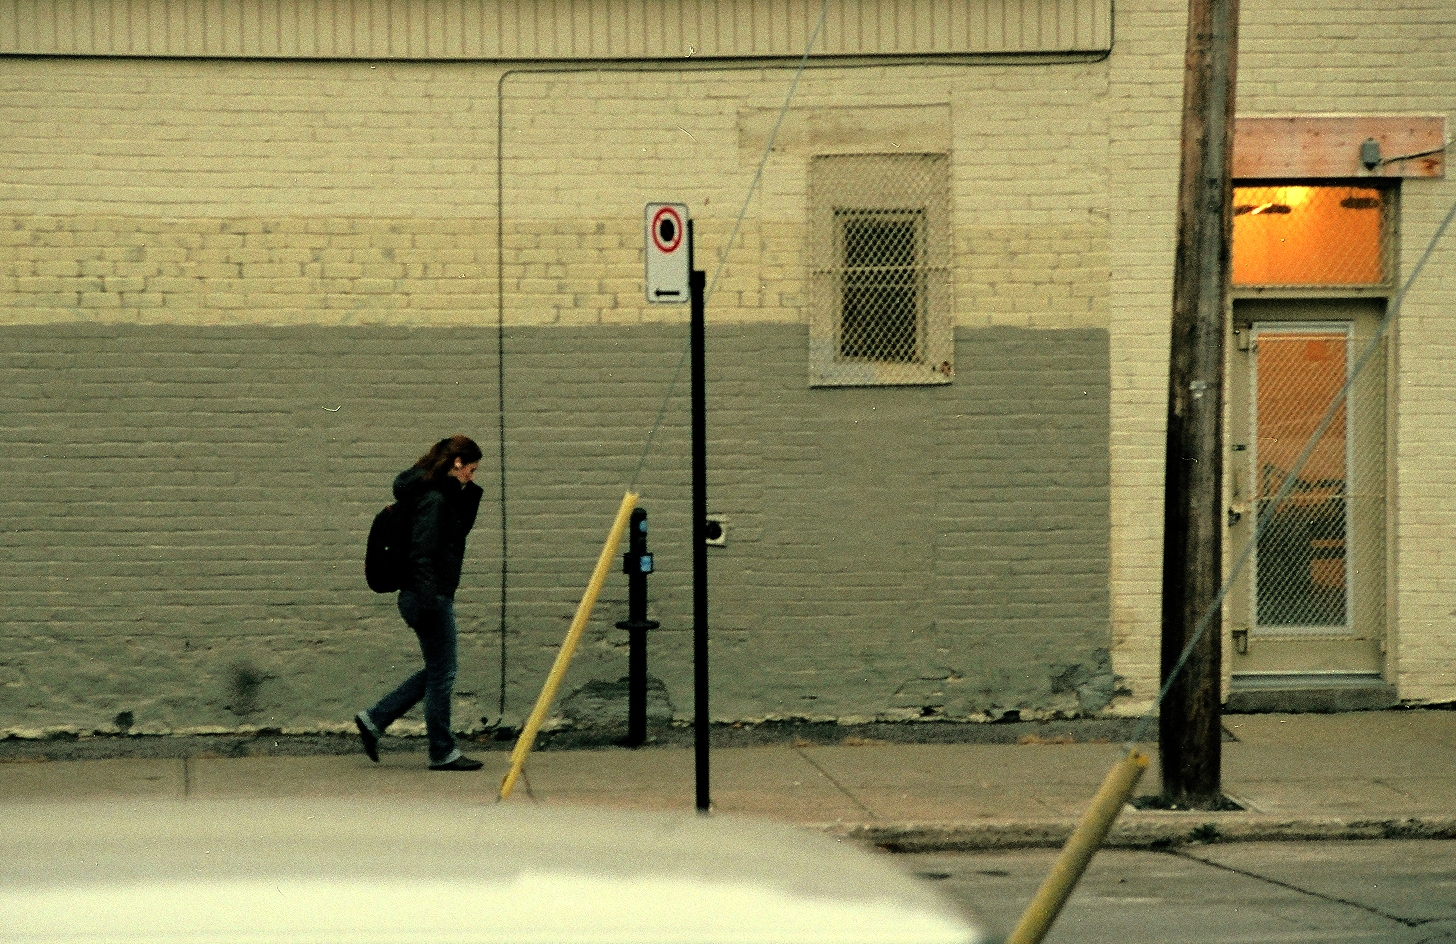 a man is walking down the street next to a parking meter